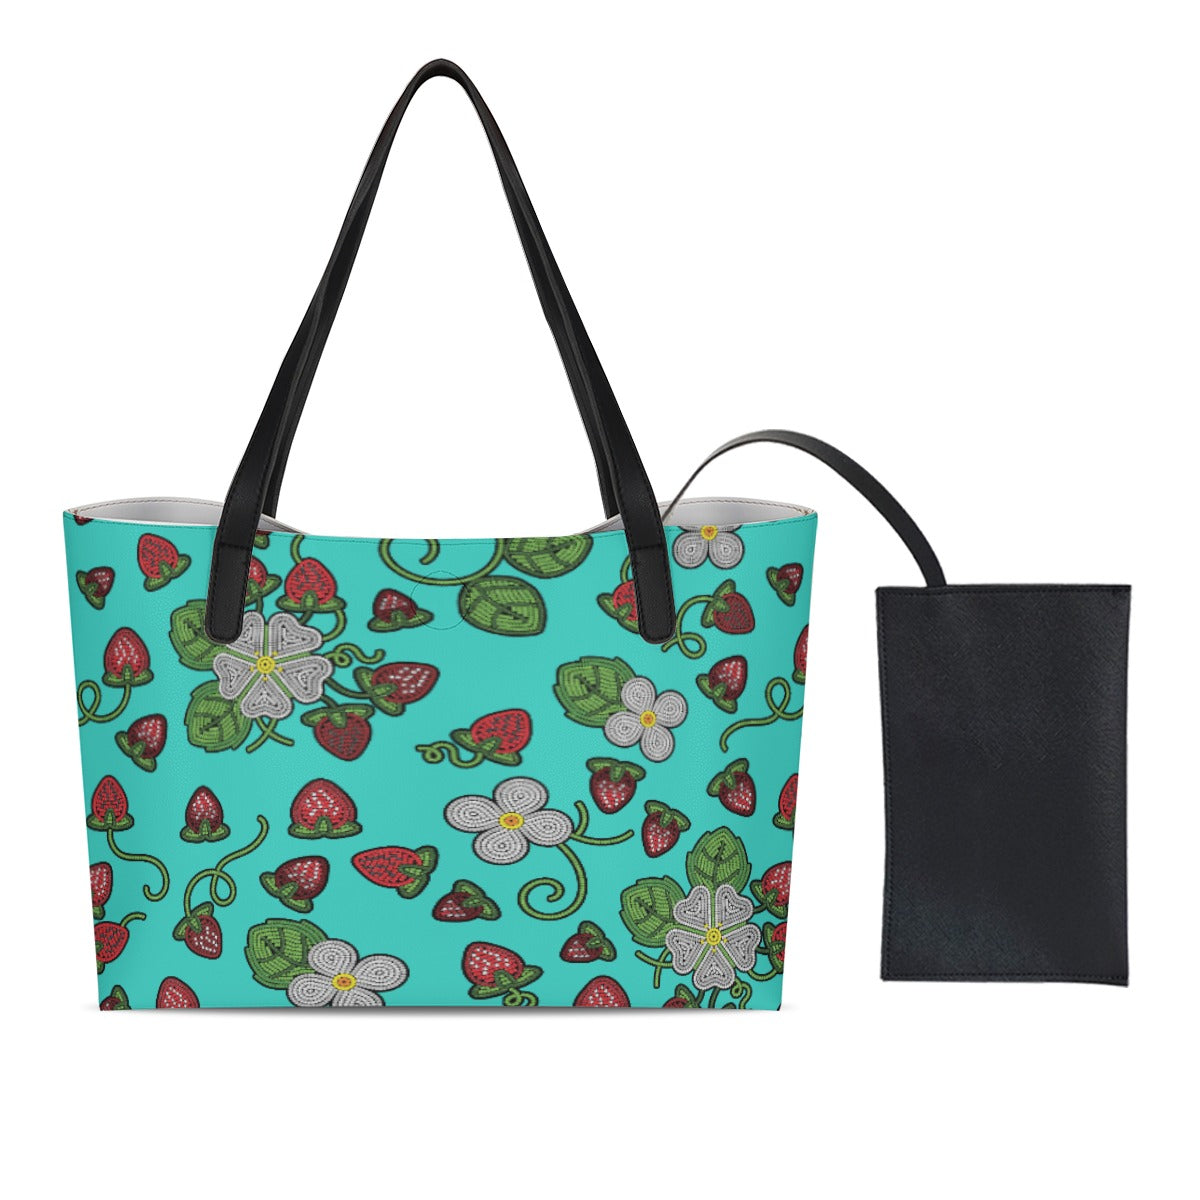 Strawberry Dreams Turquoise Shopping Tote Bag With Black Mini Purse